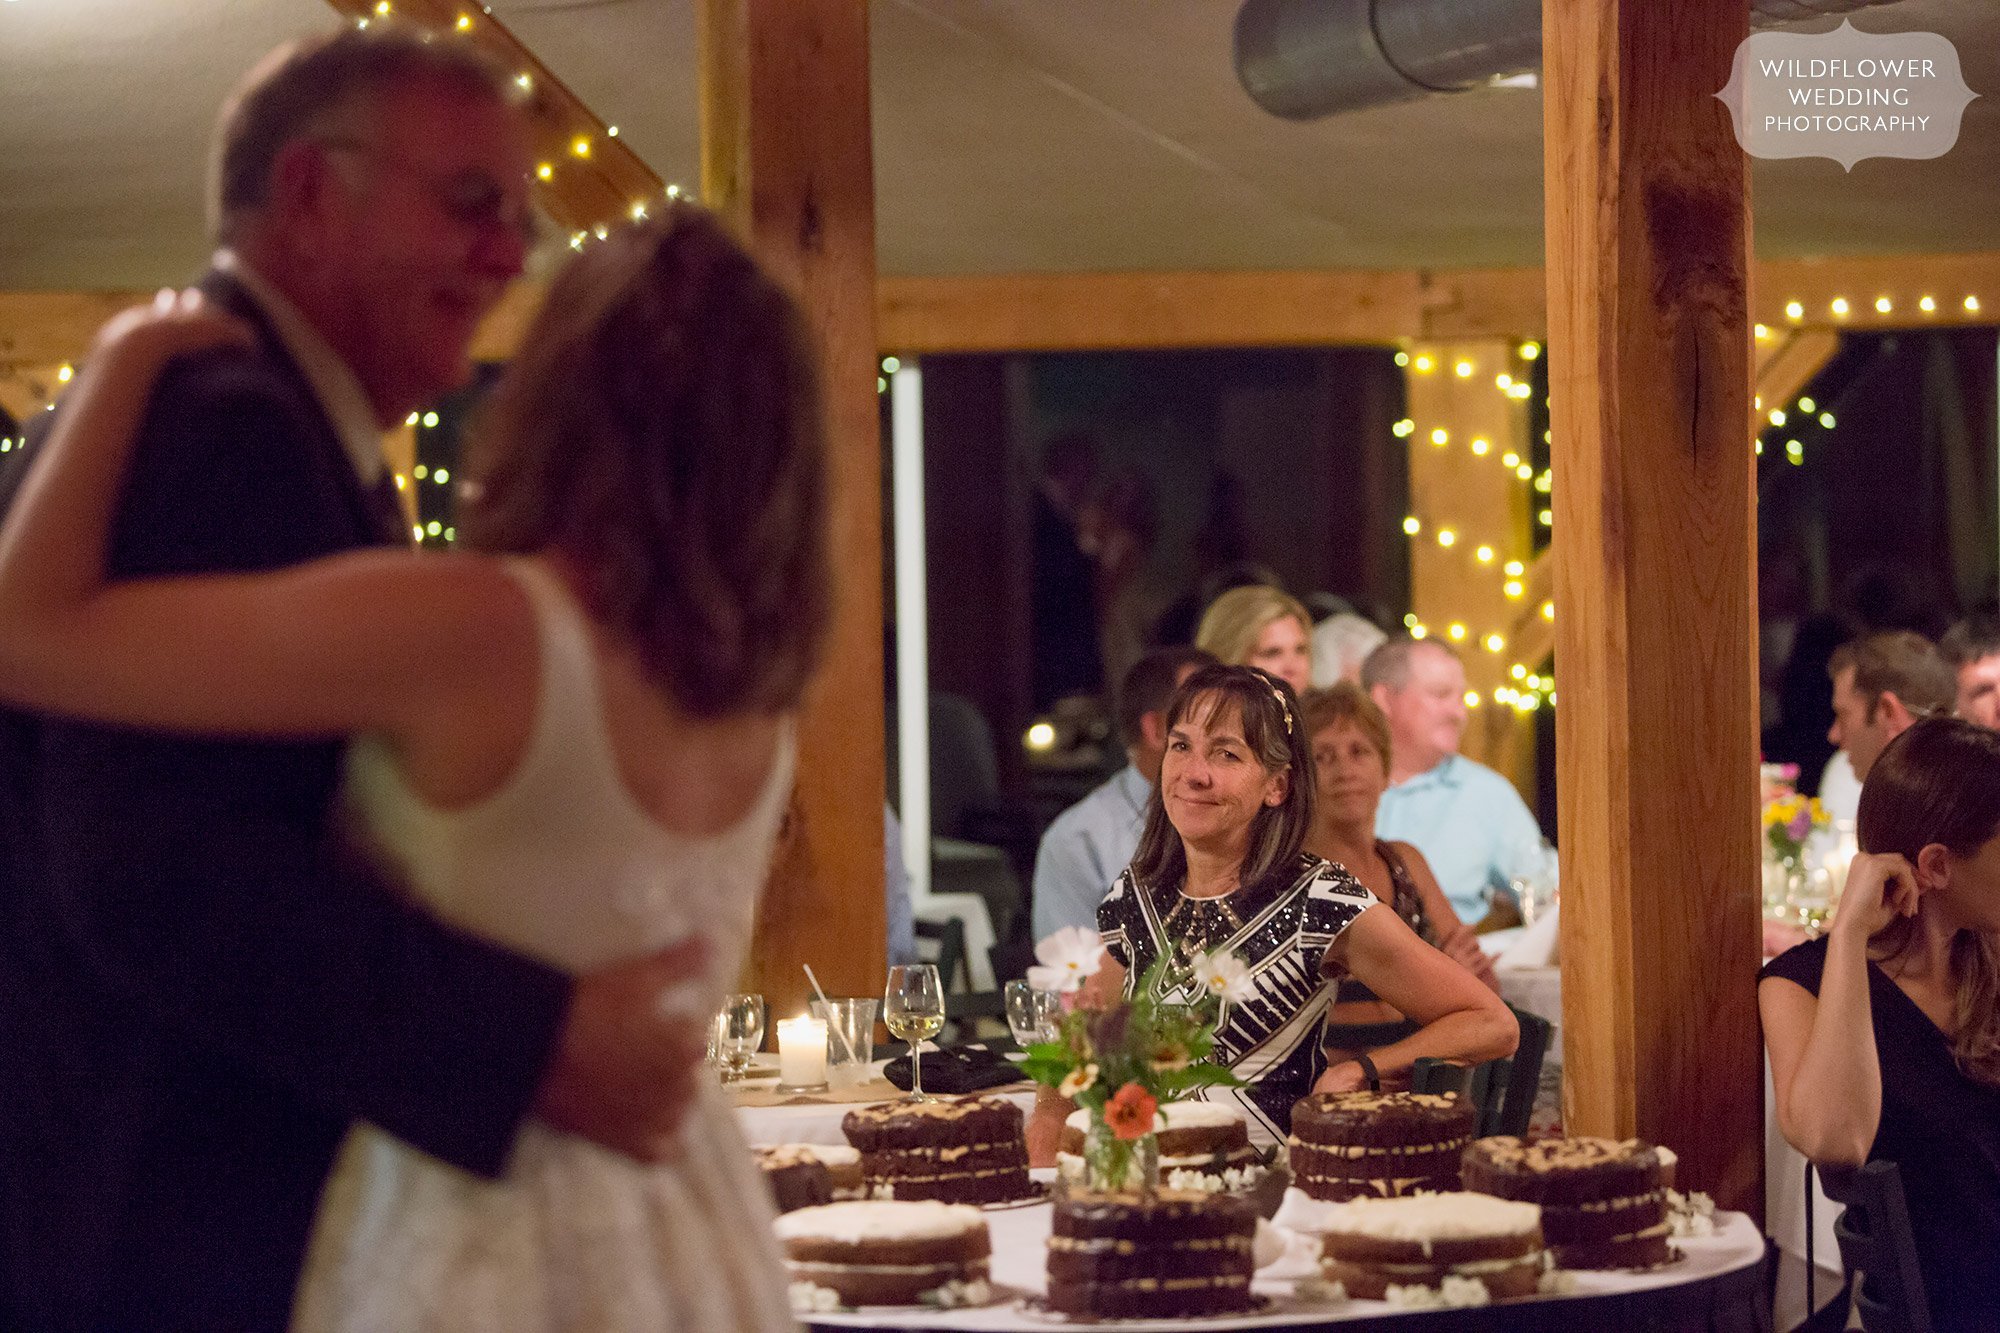 great candid moment of mother of the bride watching her daughter dance with her dad 